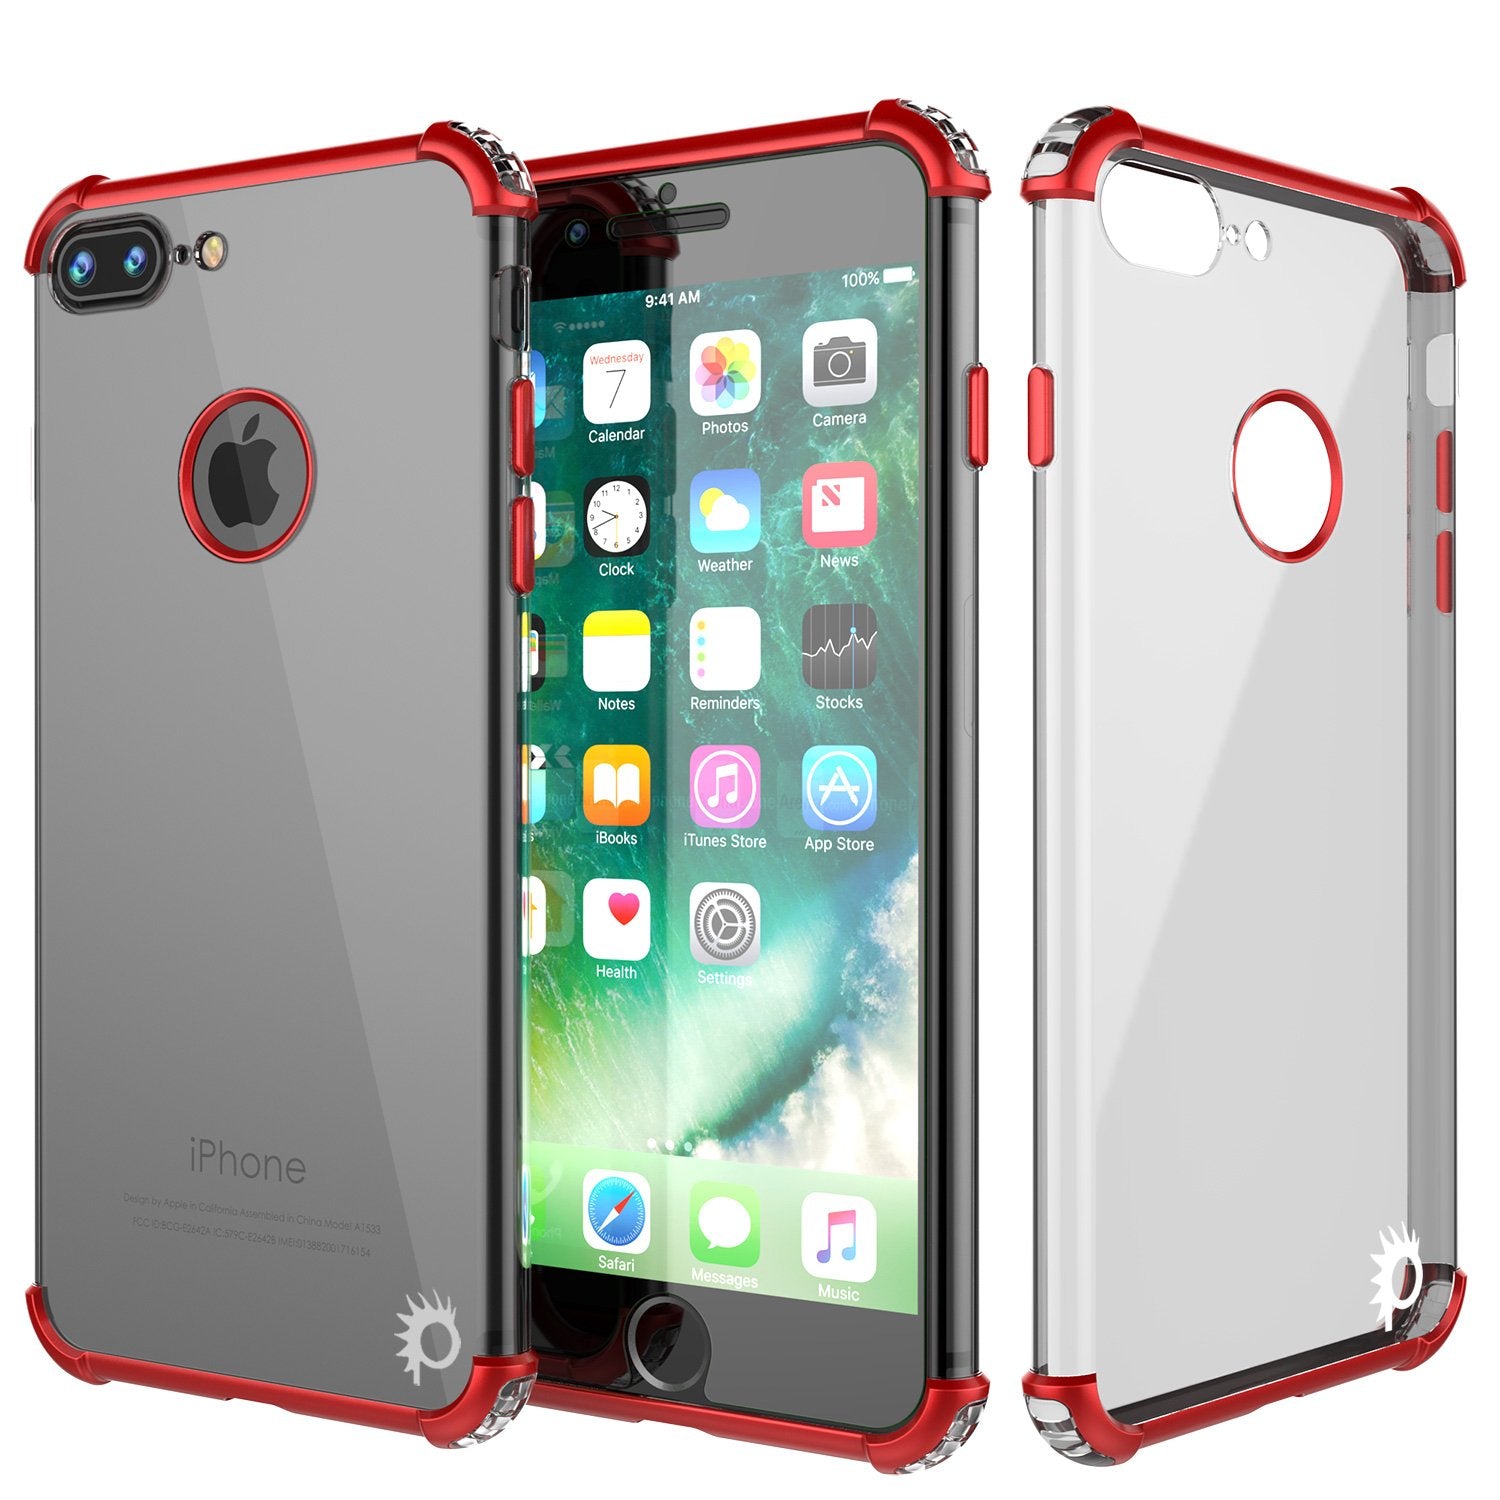 iPhone 7 PLUS Case, Punkcase [BLAZE SERIES] Protective Cover W/ PunkShield Screen Protector [Shockproof] [Slim Fit] for Apple iPhone 7 PLUS [Red]